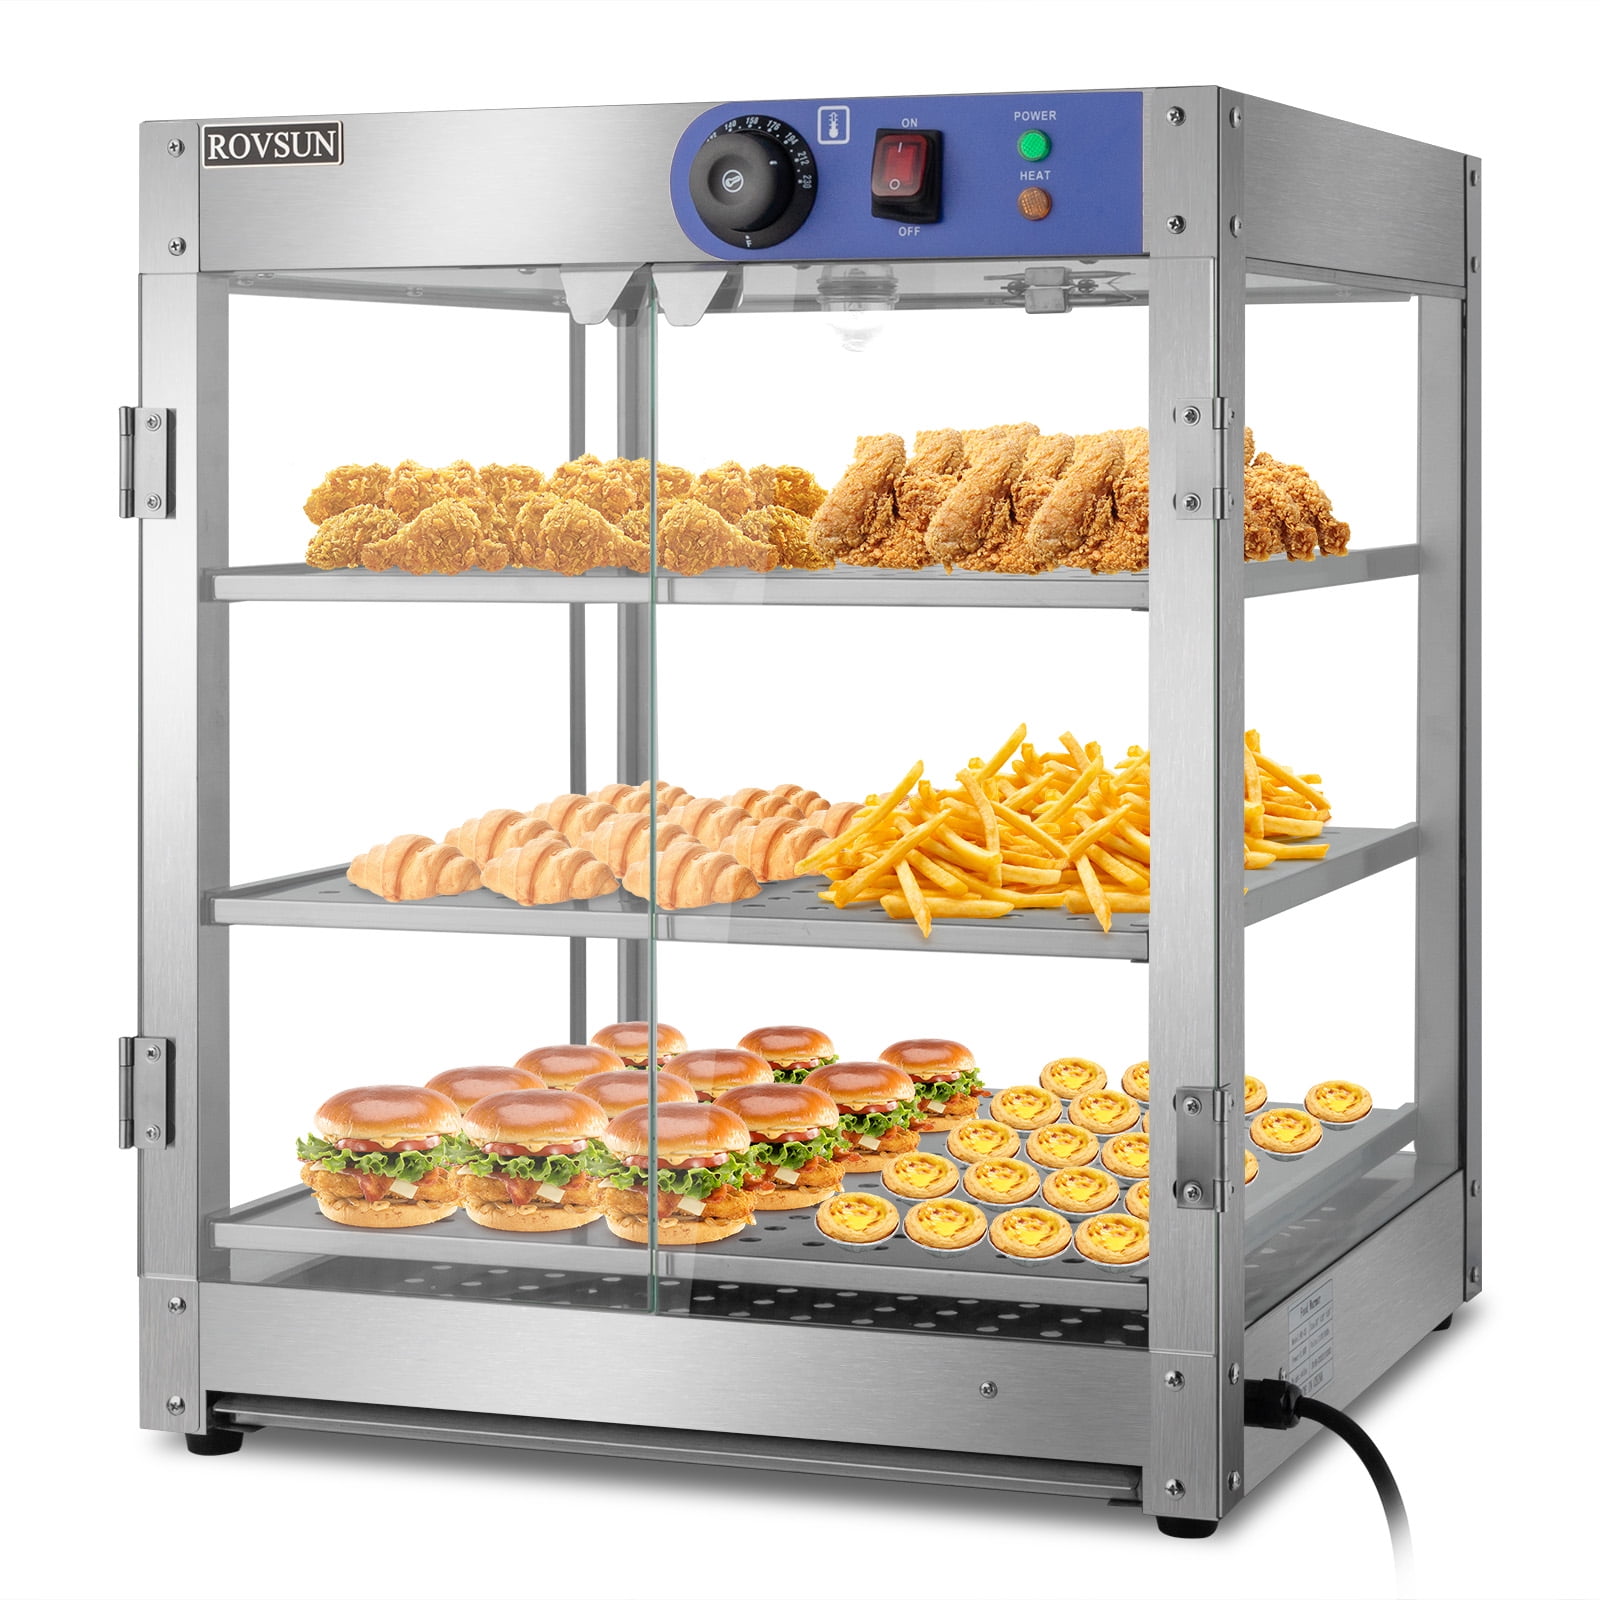 ROVSUN 3-Tier 110V Food Warmer, 800W Commercial Food Warmer Display  Electric Countertop Food Pizza Warmer with Adjustable Removable Shelves  Glass Door, Pastry Display Case for Buffet Restaurant 